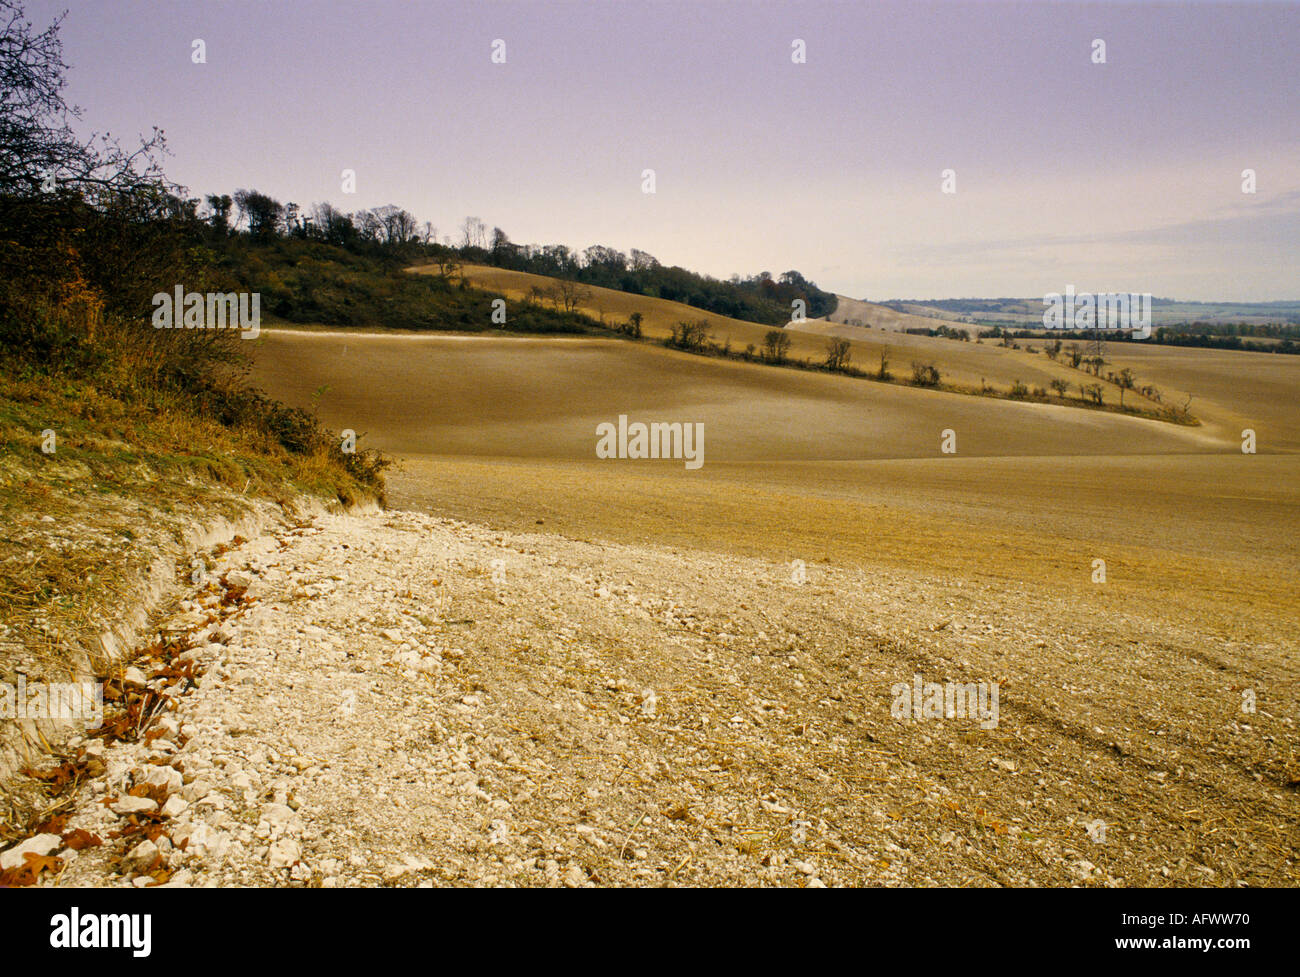 No hedges huge large fields prairie farming East Sussex England Grubbed out hedges 1992, 1990s, UK HOMER SYKES Stock Photo